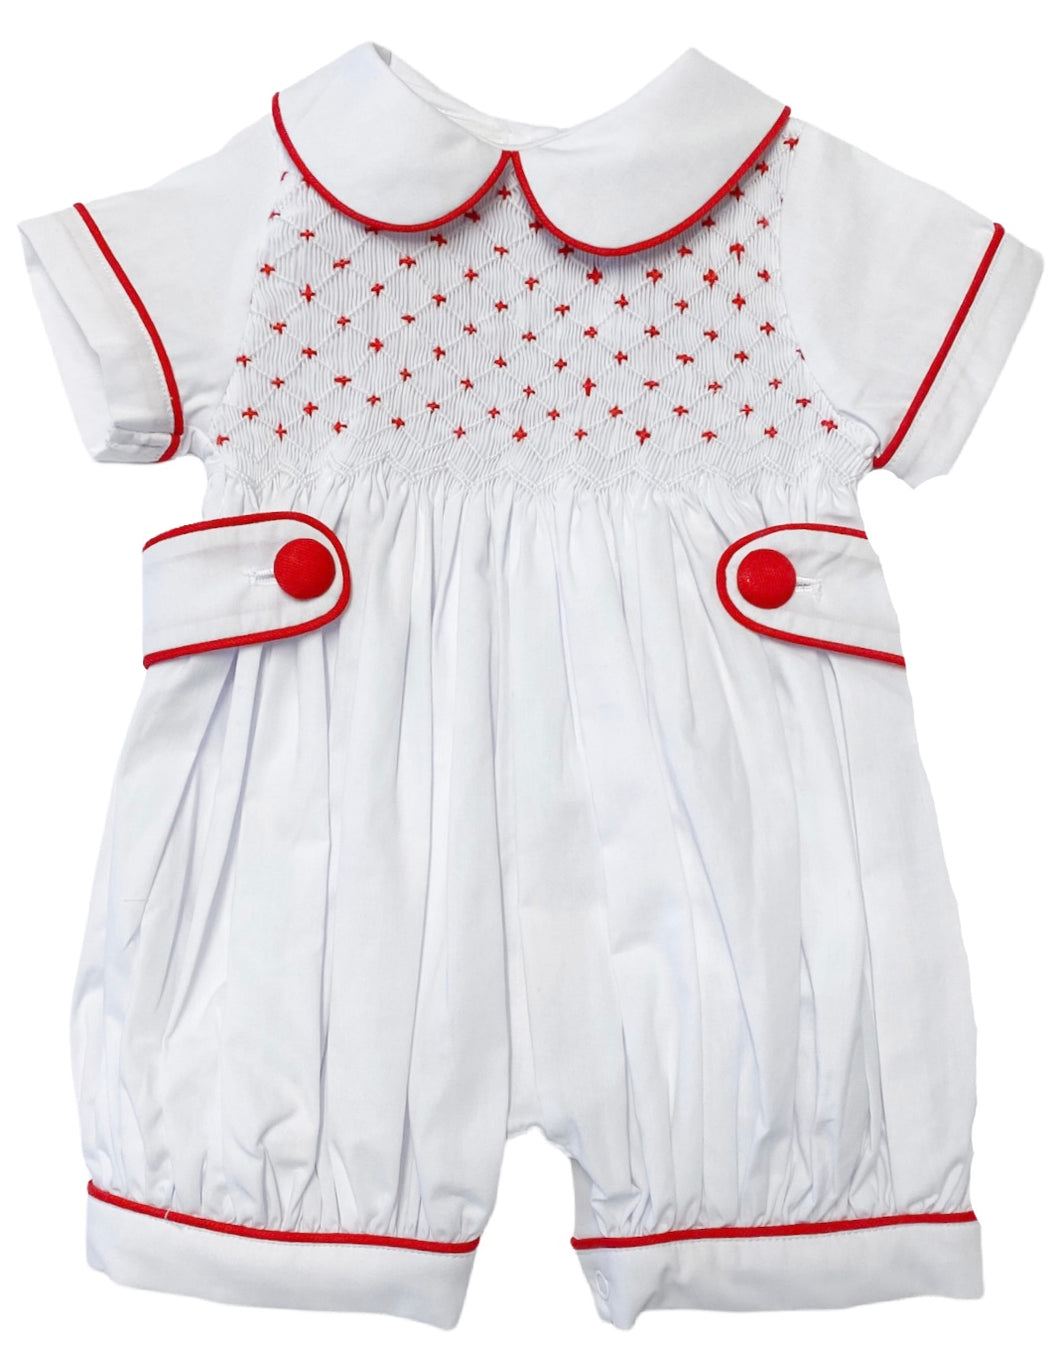 The Smocked Shortie - Heirloom White/Classic Red